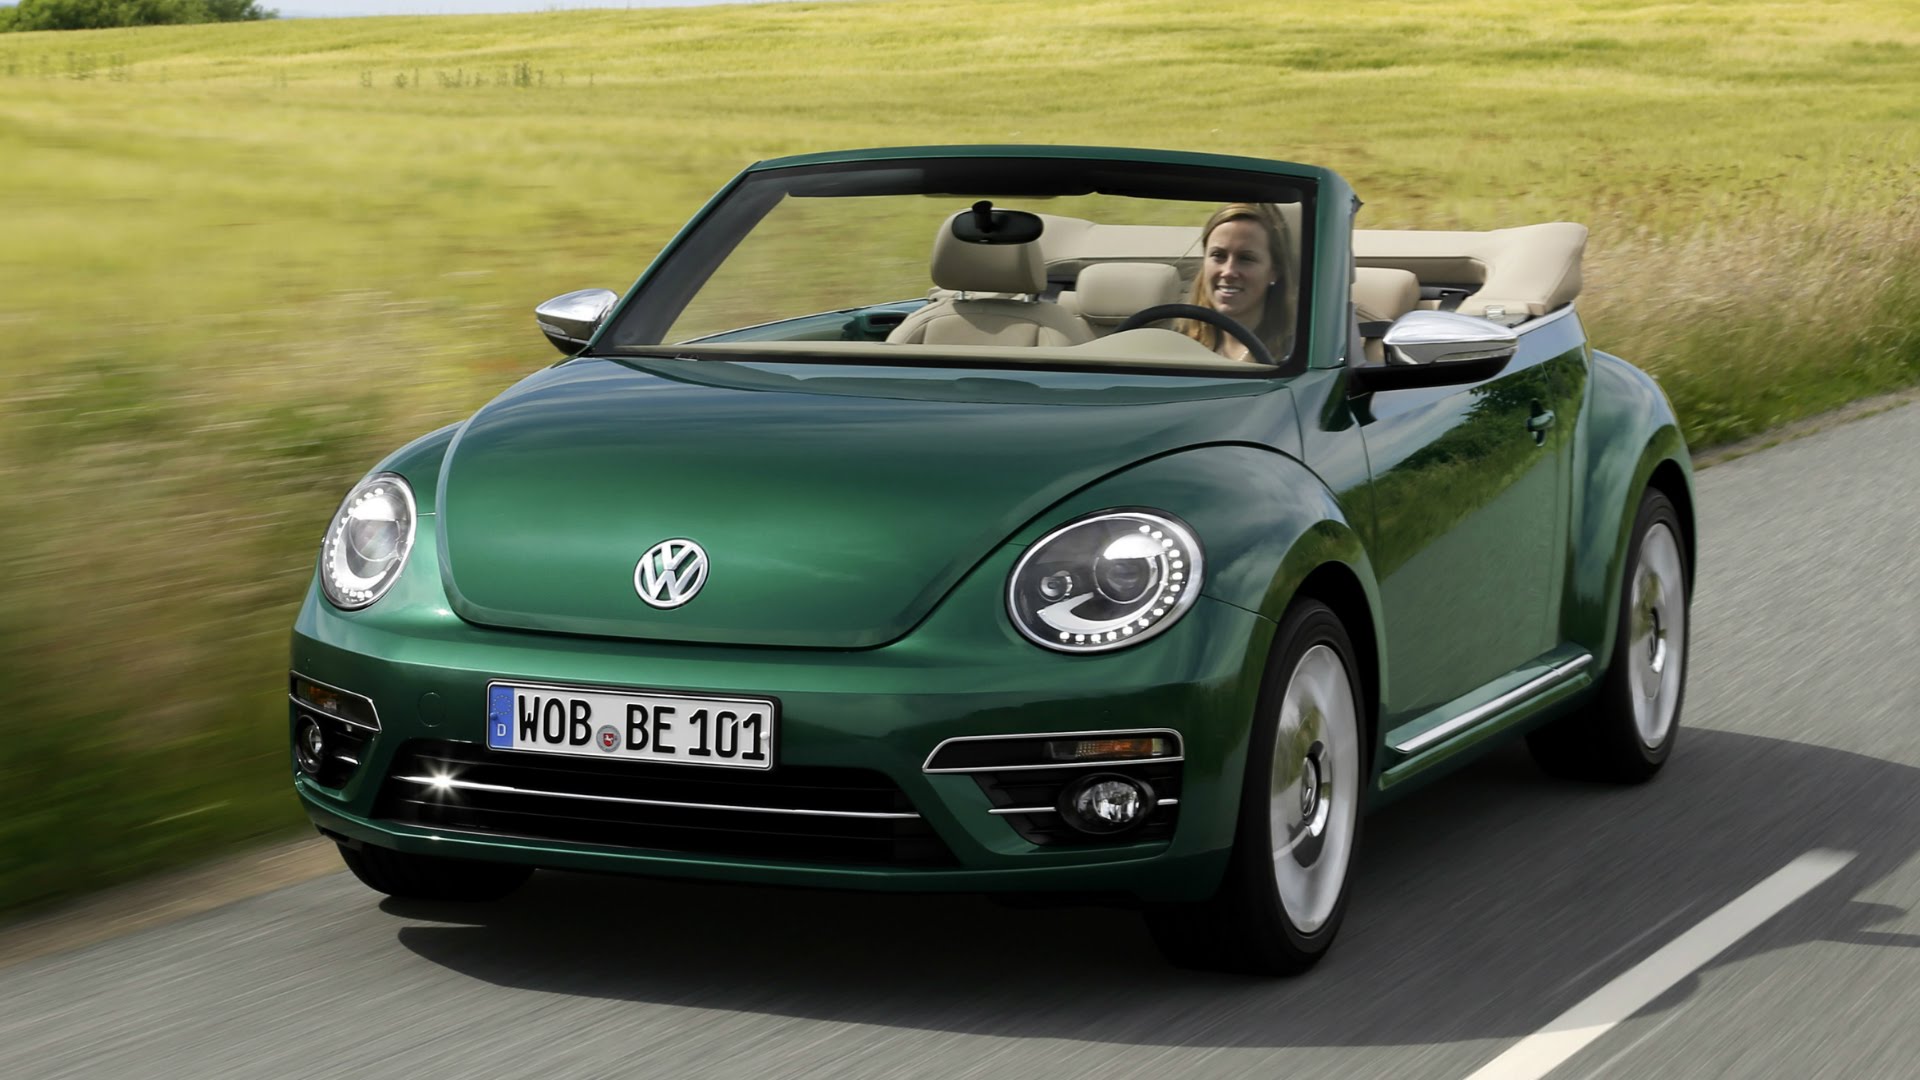 2017 Volkswagen Beetle Cabriolet Interior, Exterior and Drive - YouTube